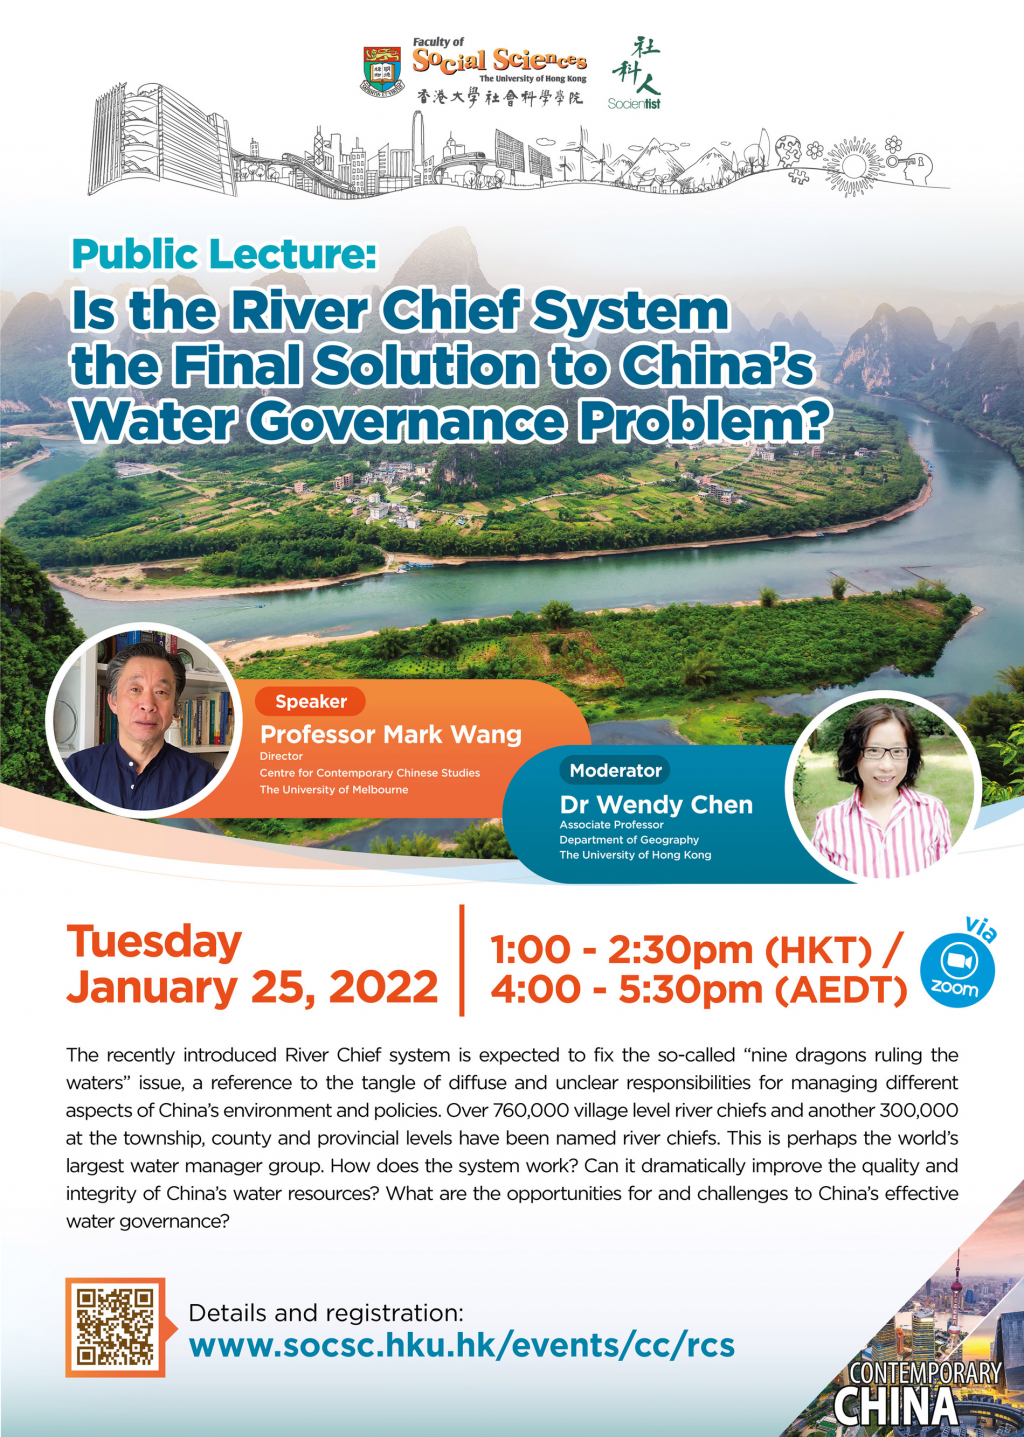 Contemporary China Research Cluster Public Lecture: Is the River Chief System the Final Solution to Chinaâs Water Governance Problem?